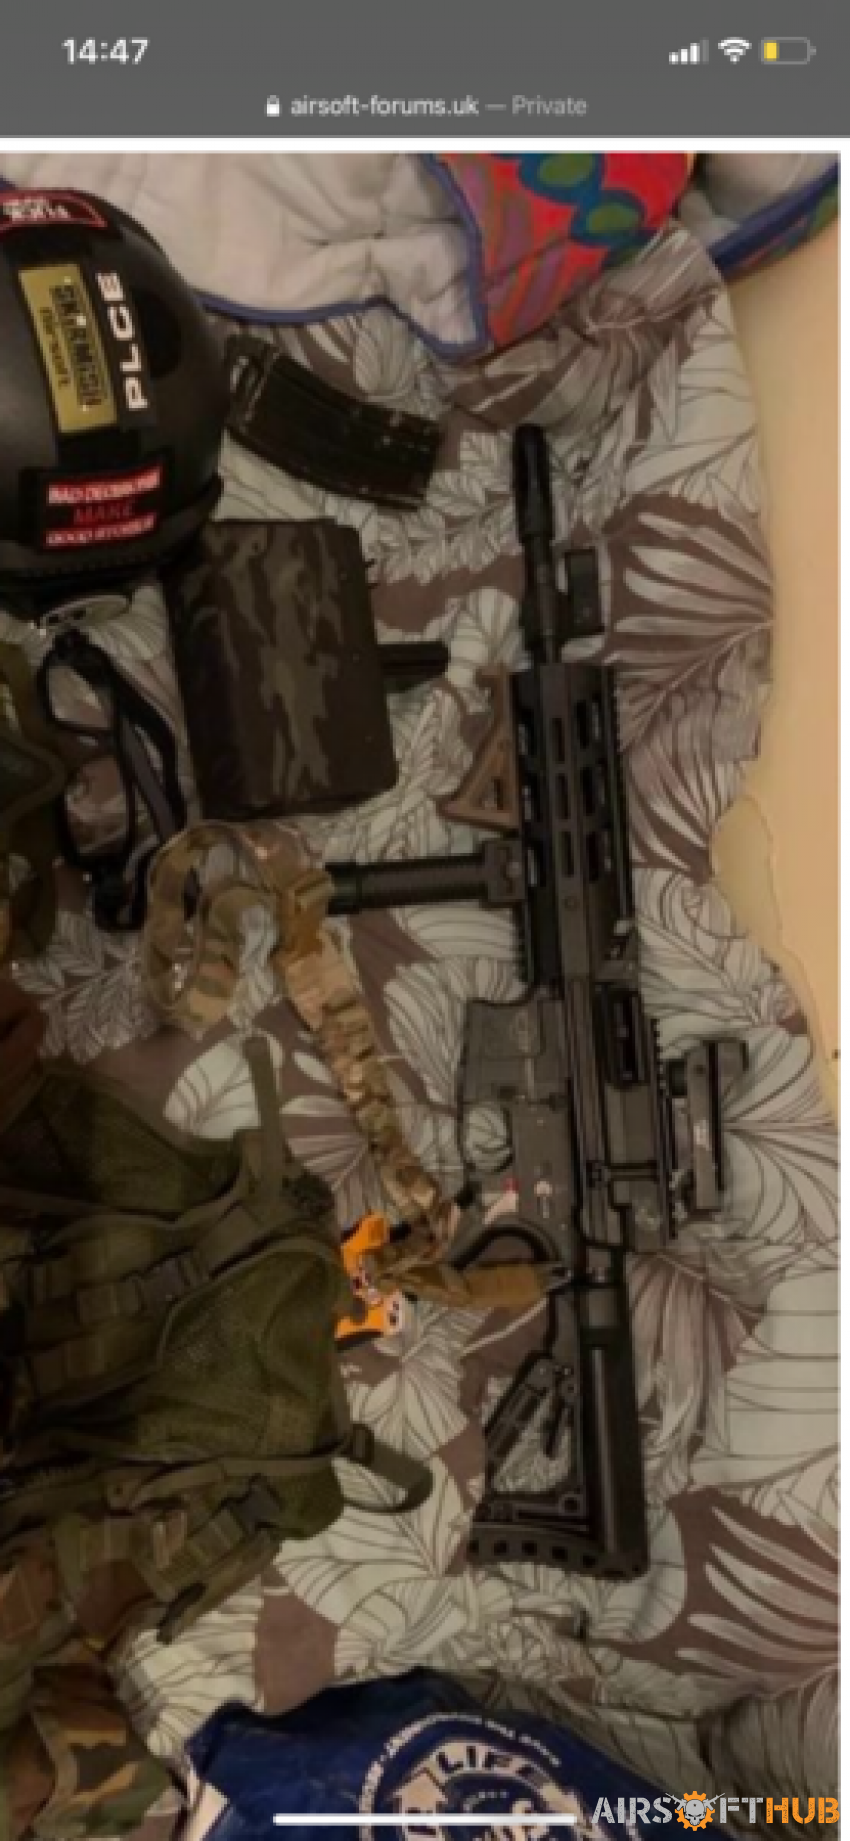 Airsoft lmg and extras - Used airsoft equipment